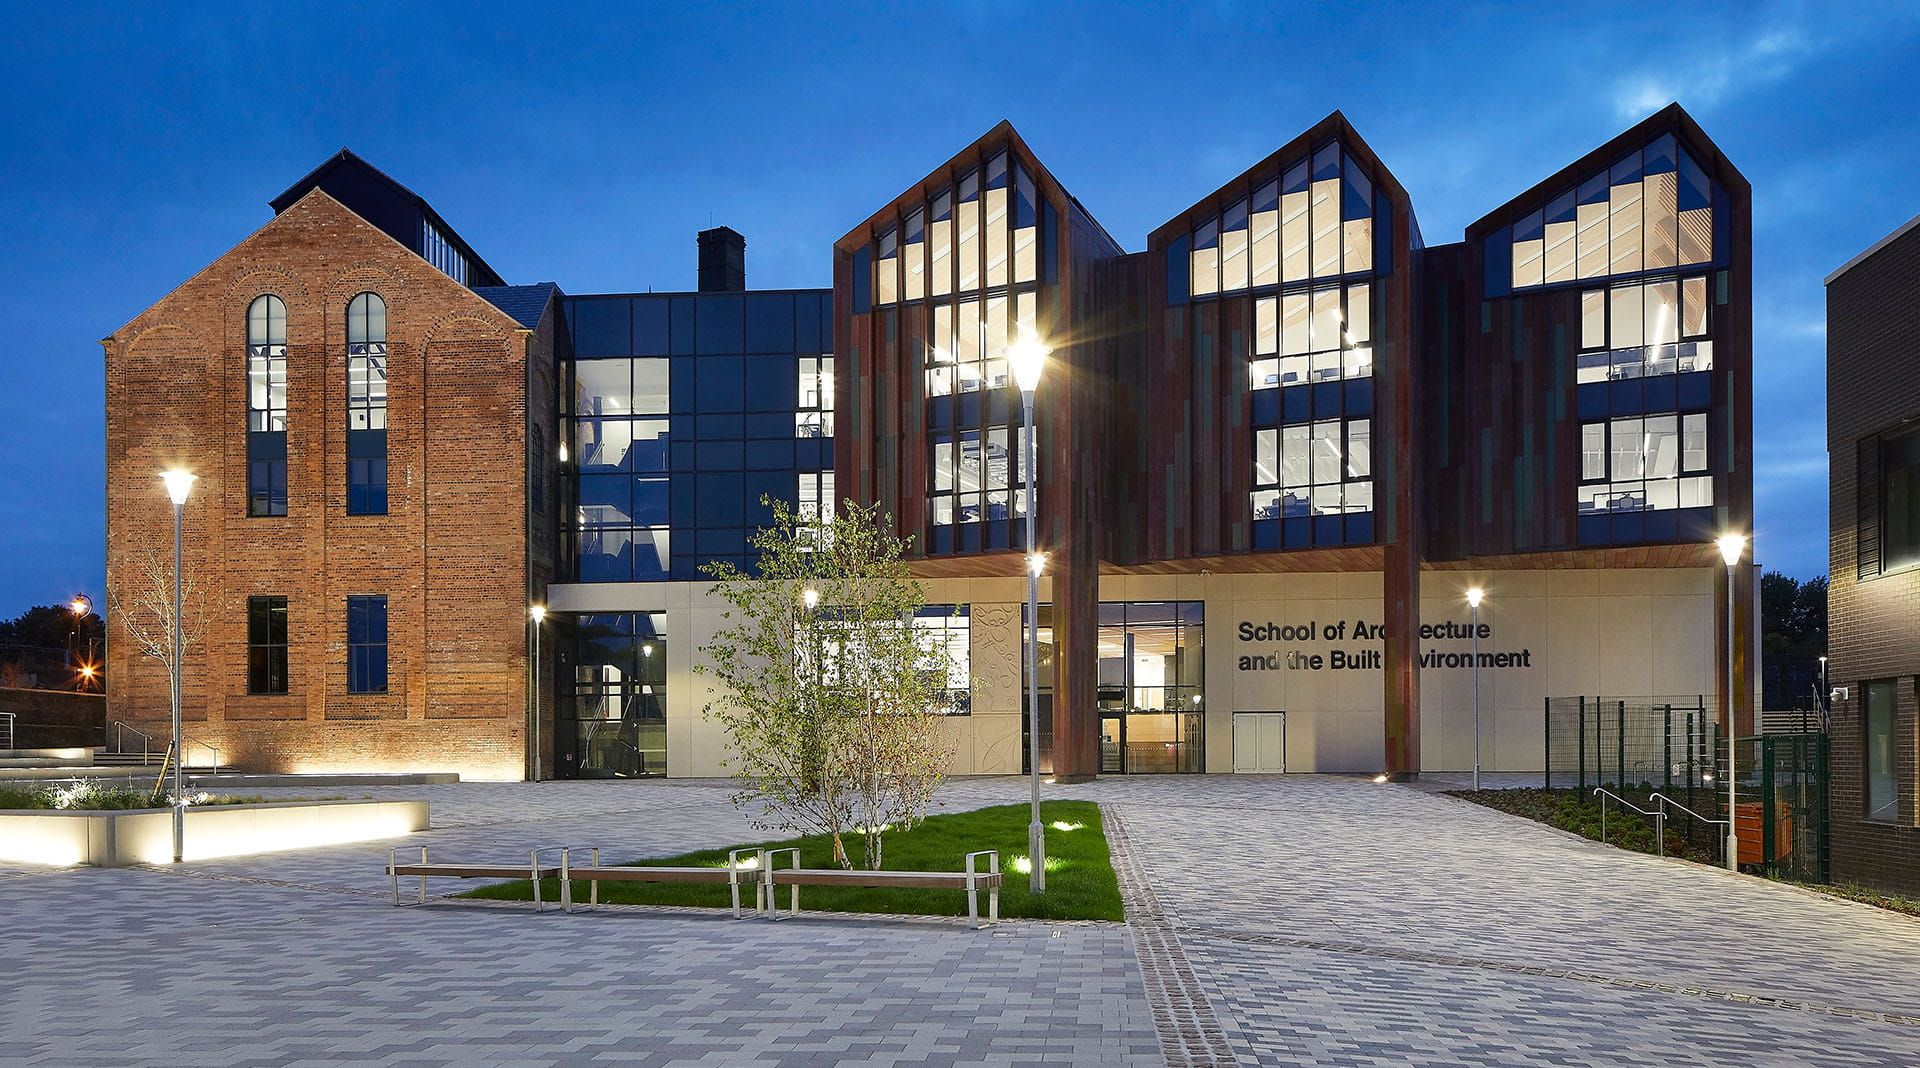 Exterior Associated Architects Wolverhampton Hufton Crow building at evening time